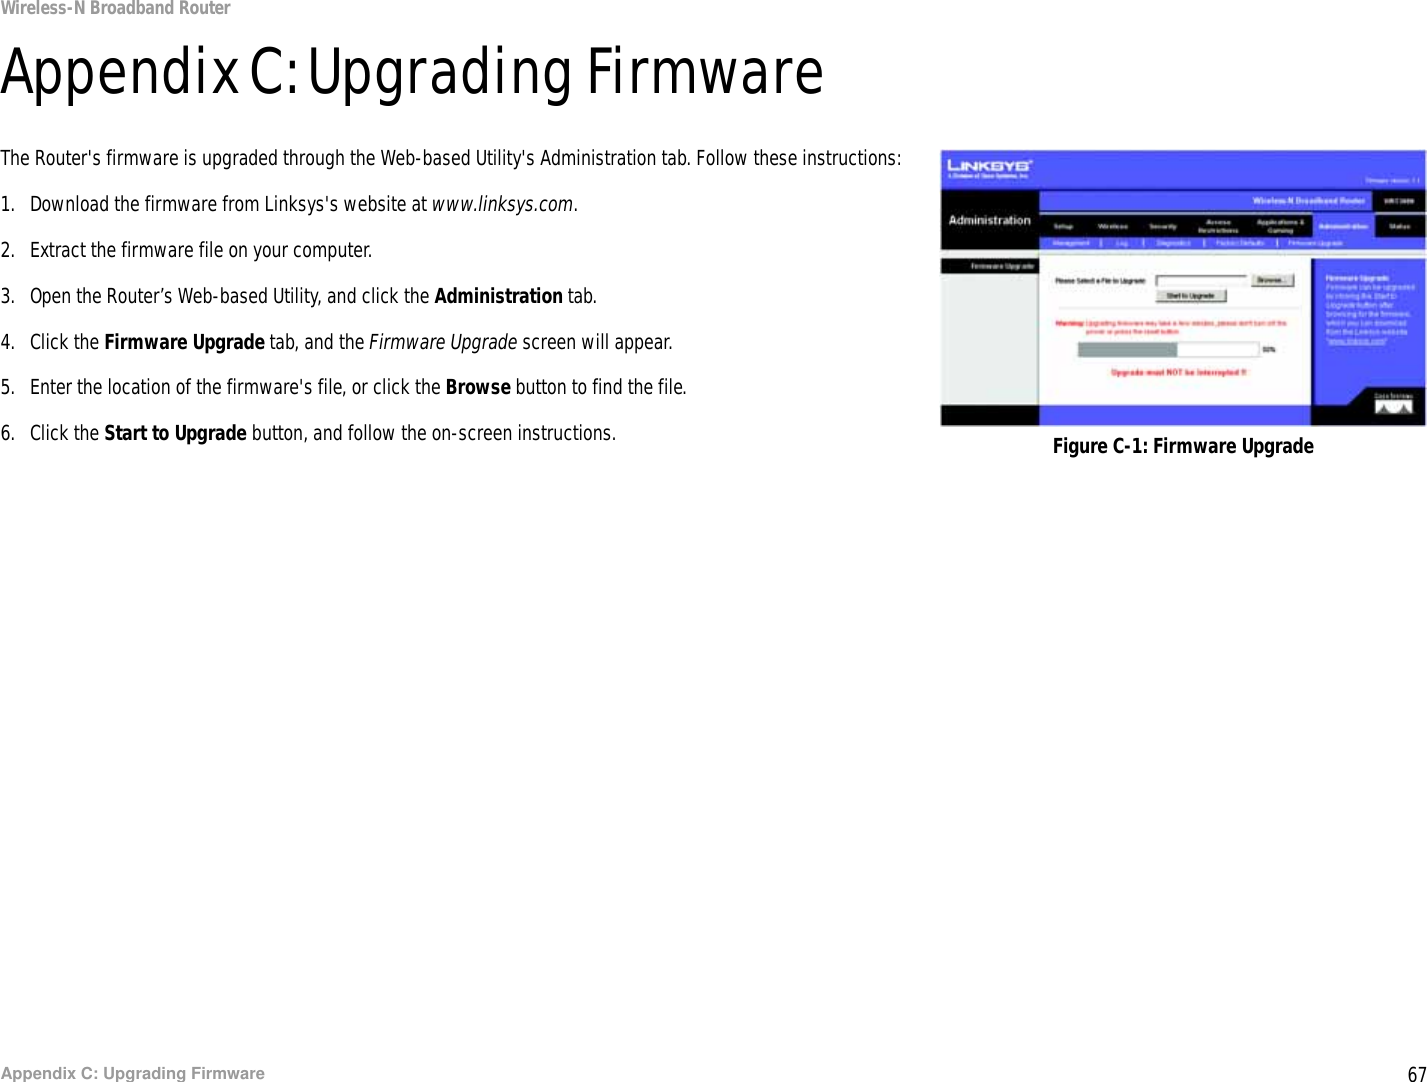 67Appendix C: Upgrading FirmwareWireless-N Broadband RouterAppendix C: Upgrading FirmwareThe Router&apos;s firmware is upgraded through the Web-based Utility&apos;s Administration tab. Follow these instructions:1. Download the firmware from Linksys&apos;s website at www.linksys.com.2. Extract the firmware file on your computer.3. Open the Router’s Web-based Utility, and click the Administration tab.4. Click the Firmware Upgrade tab, and the Firmware Upgrade screen will appear.5. Enter the location of the firmware&apos;s file, or click the Browse button to find the file.6. Click the Start to Upgrade button, and follow the on-screen instructions. Figure C-1: Firmware Upgrade